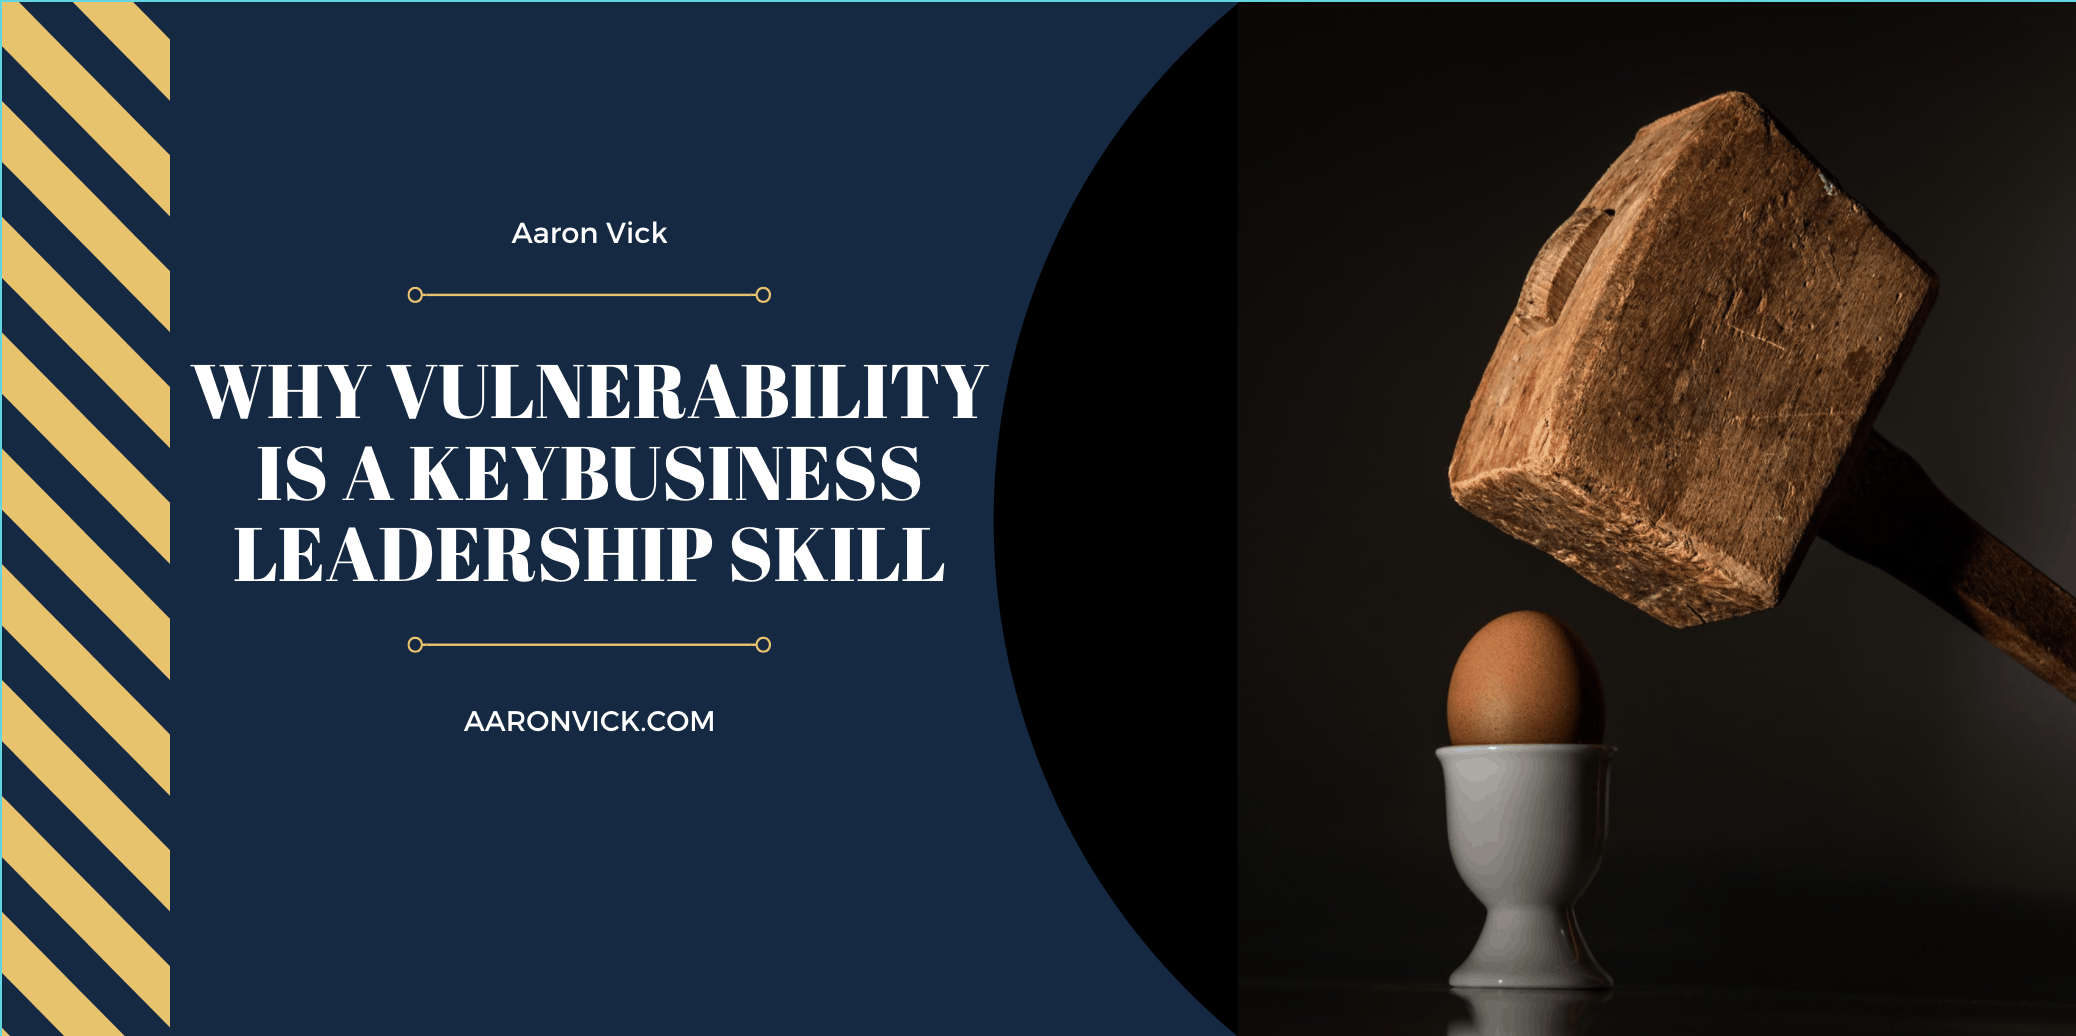 Aaron Vick - Why Vulnerability is a KeyBusiness Leadership Skill